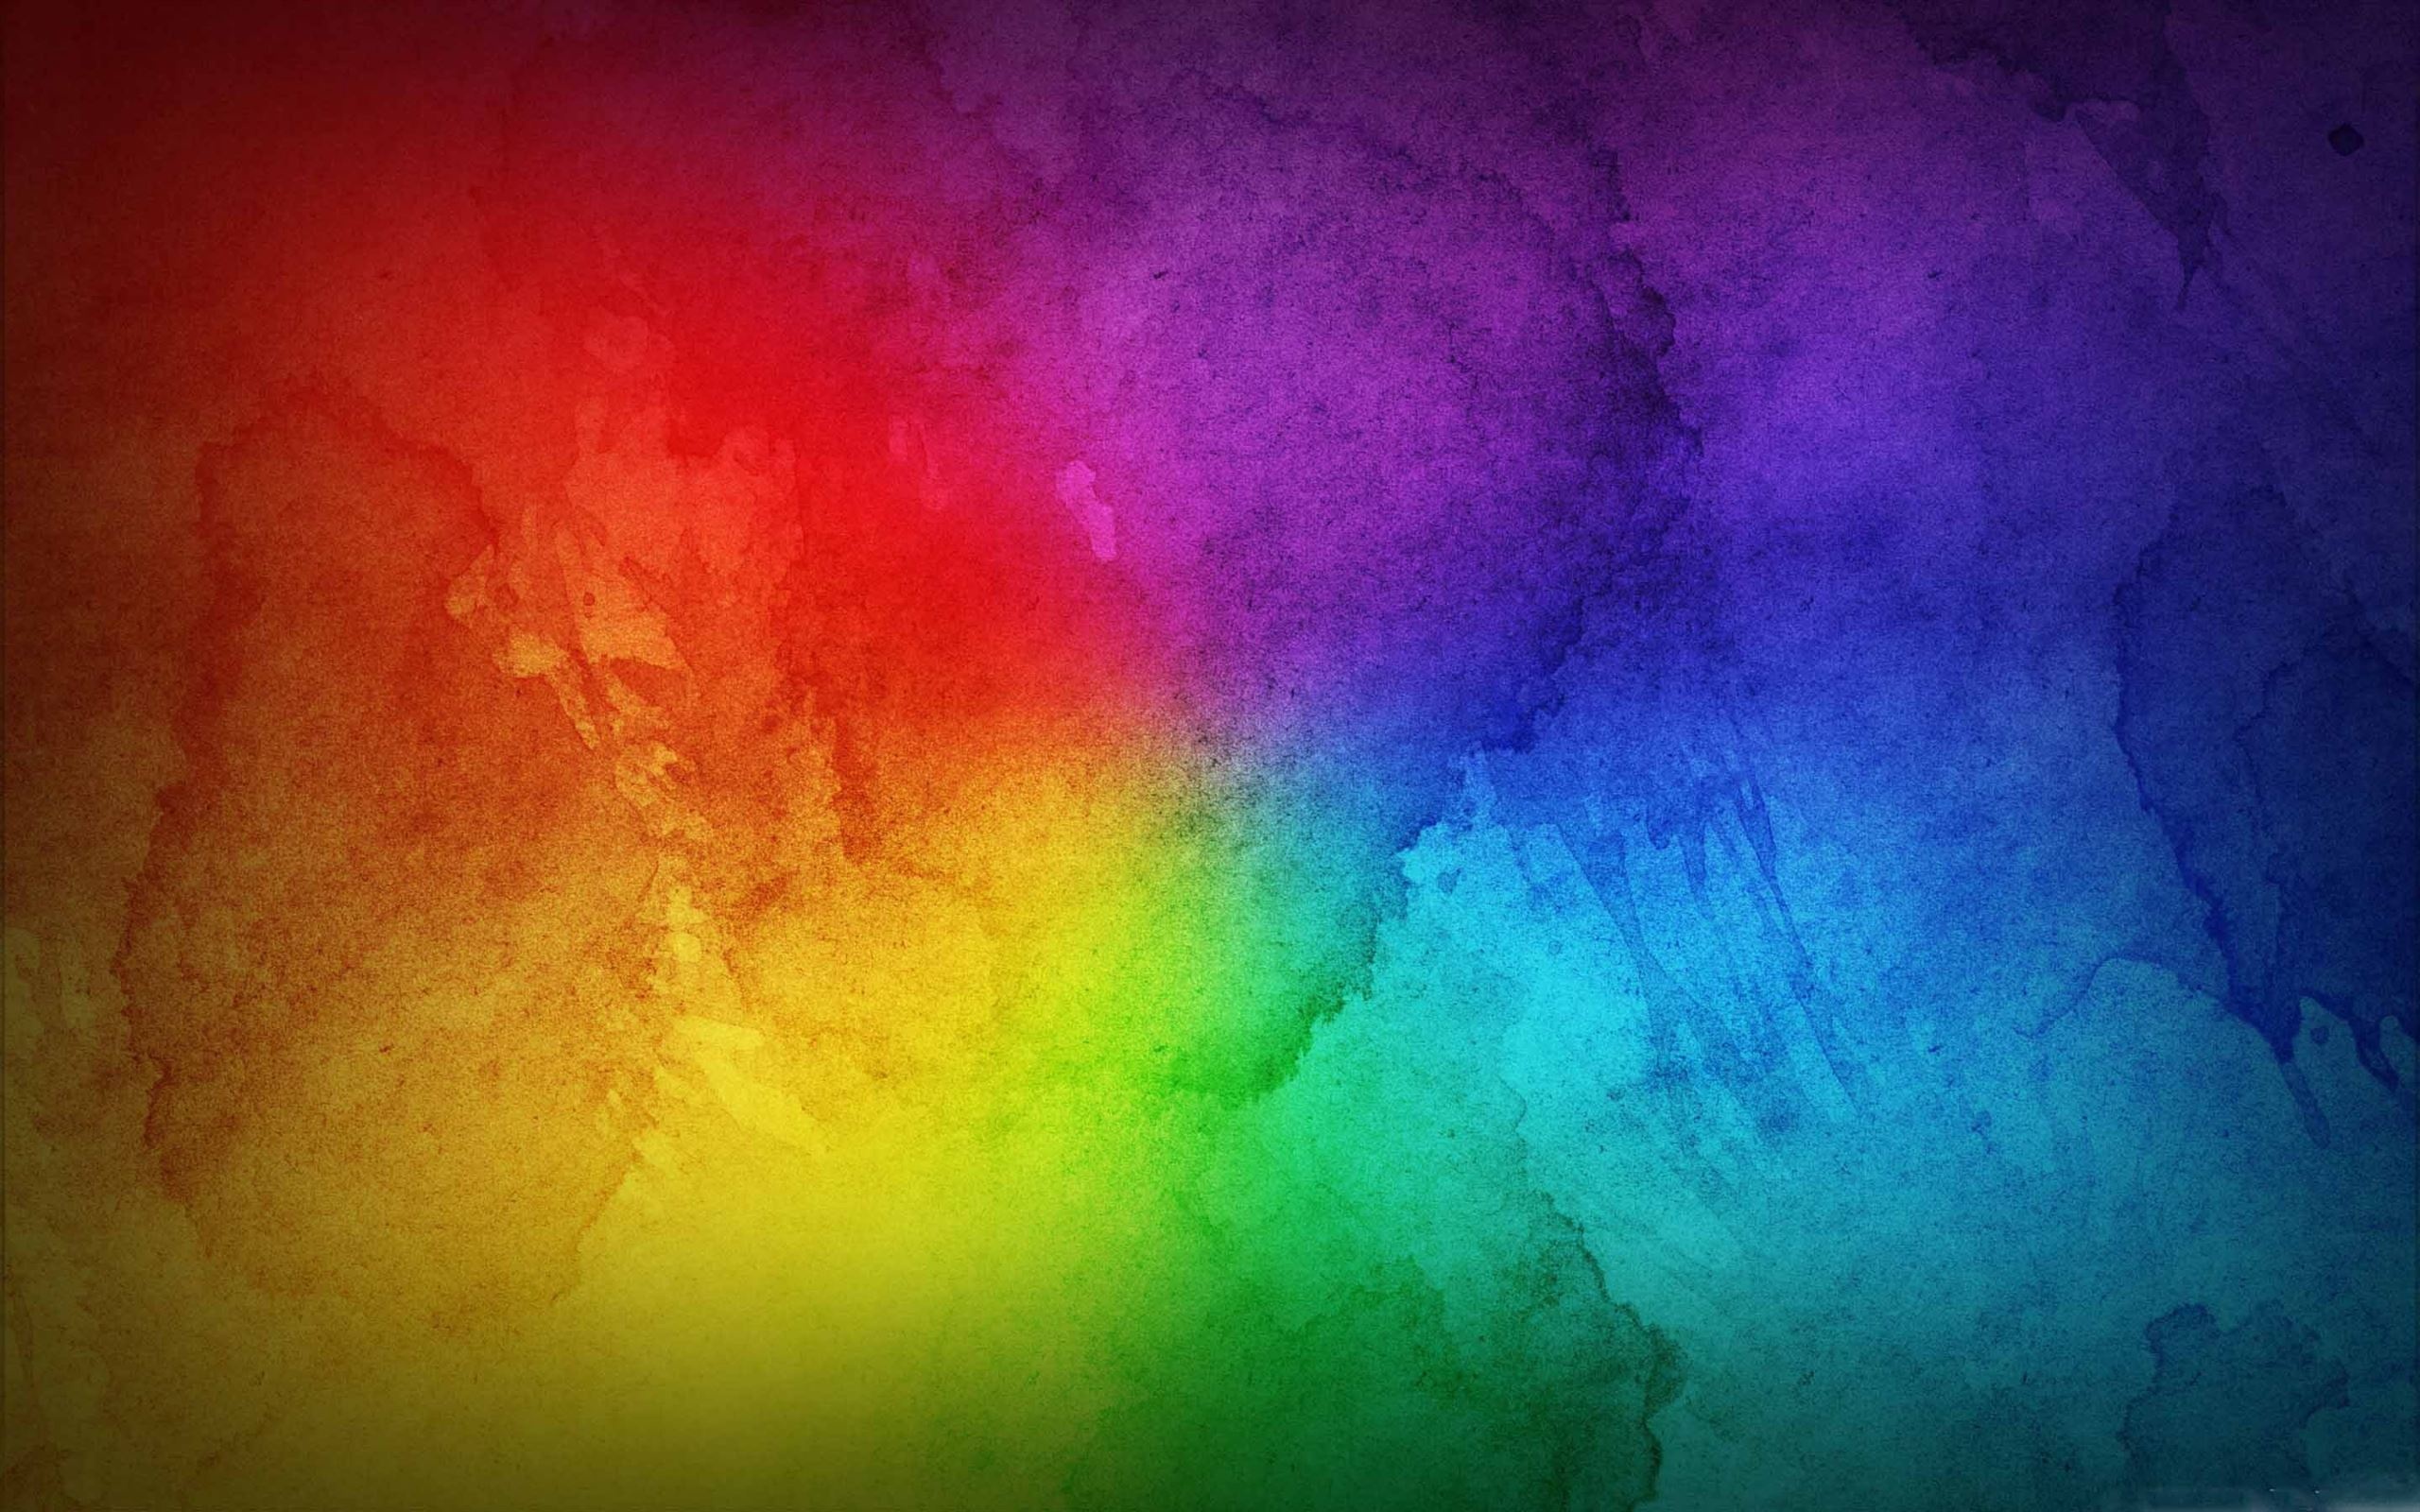 Rainbow Mac wallpapers, High-definition and free download, Colorful and vibrant, Desktop customization, 2560x1600 HD Desktop